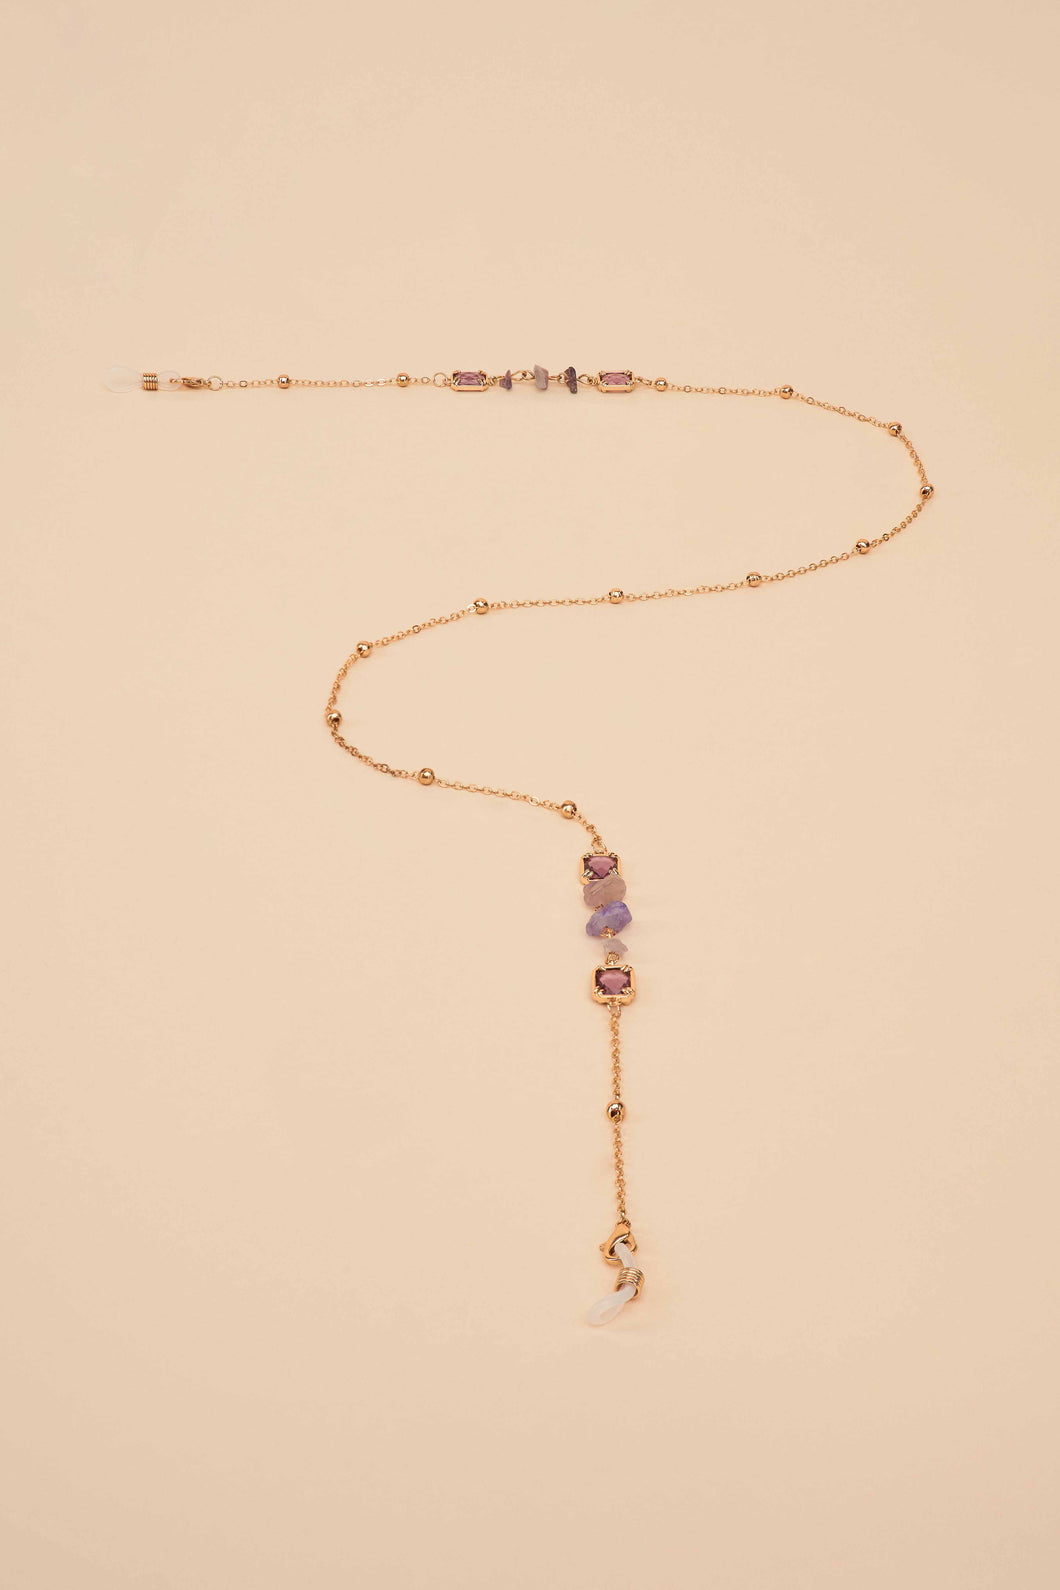 Delicate glasses chain in amethyst